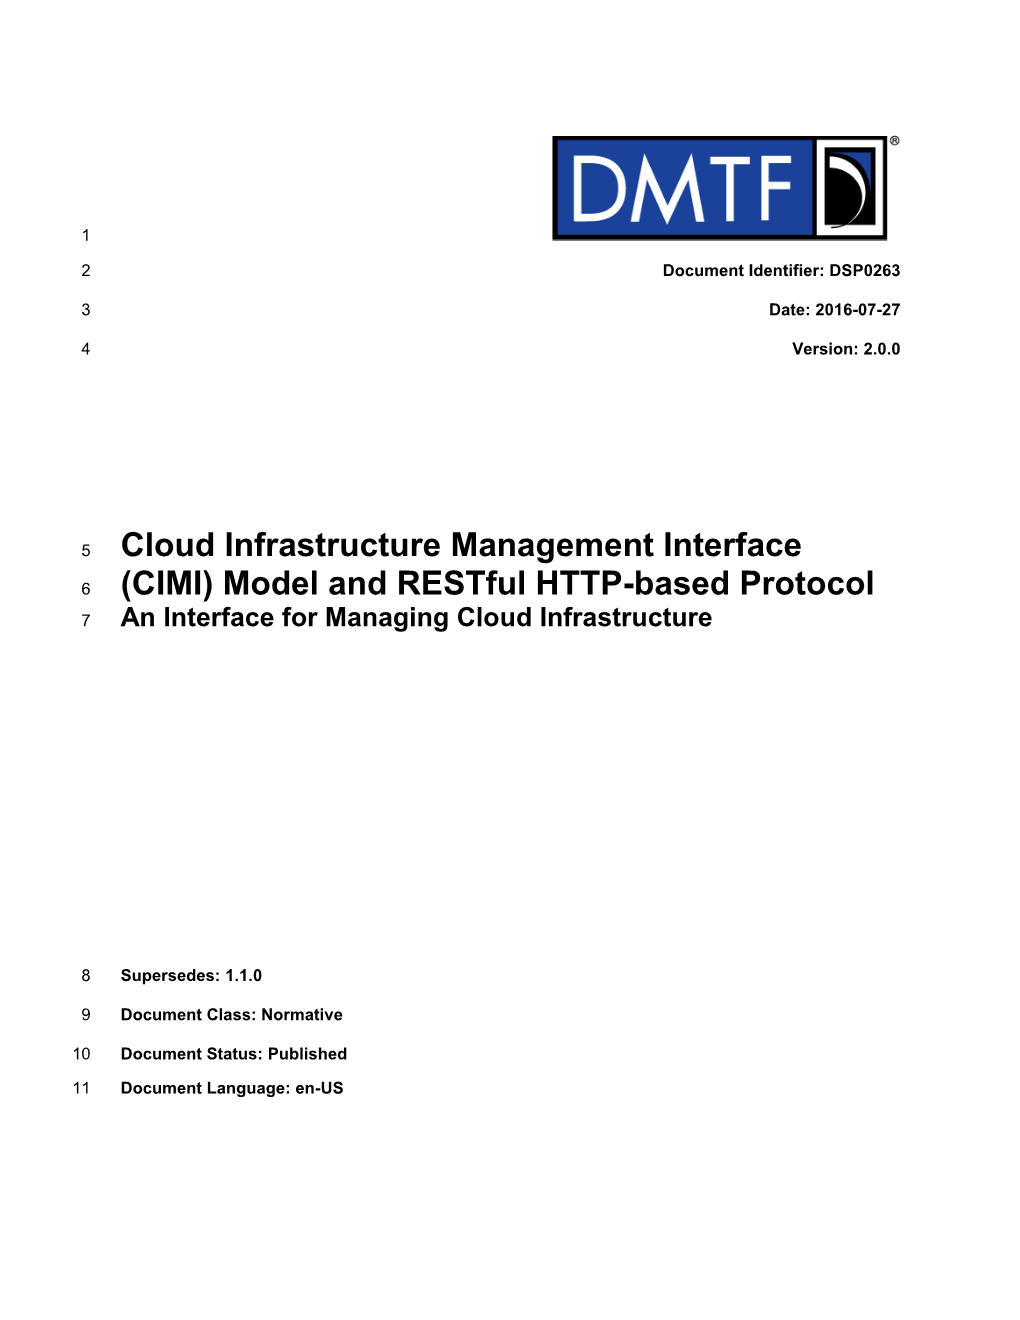 Cloud Infrastructure Management Interface (CIMI) Model and Restful HTTP-Based Protocol DSP0263